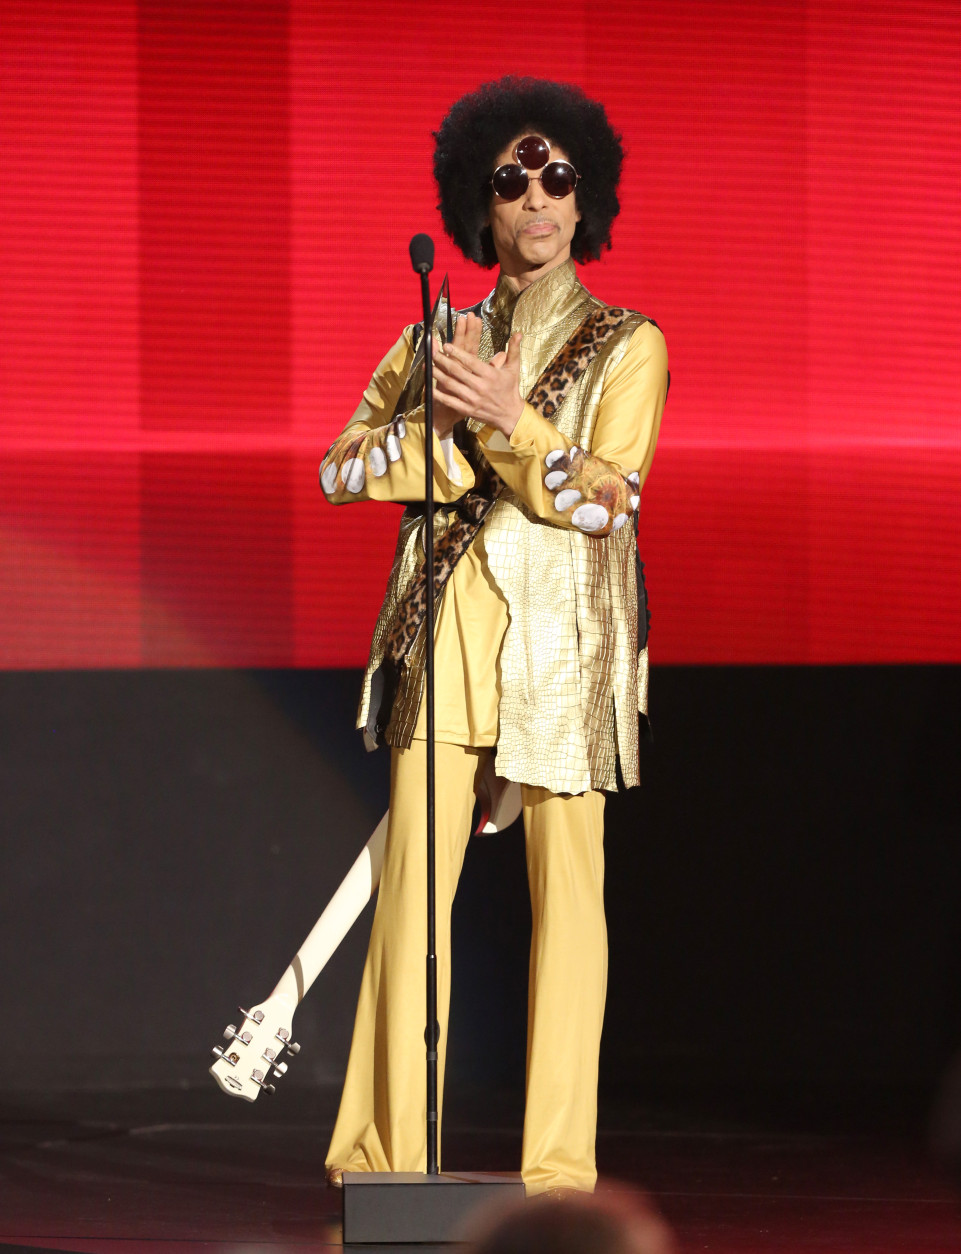 Prince presents the award for favorite album - soul/R&amp;B at the American Music Awards at the Microsoft Theater on Sunday, Nov. 22, 2015, in Los Angeles. (Photo by Matt Sayles/Invision/AP)